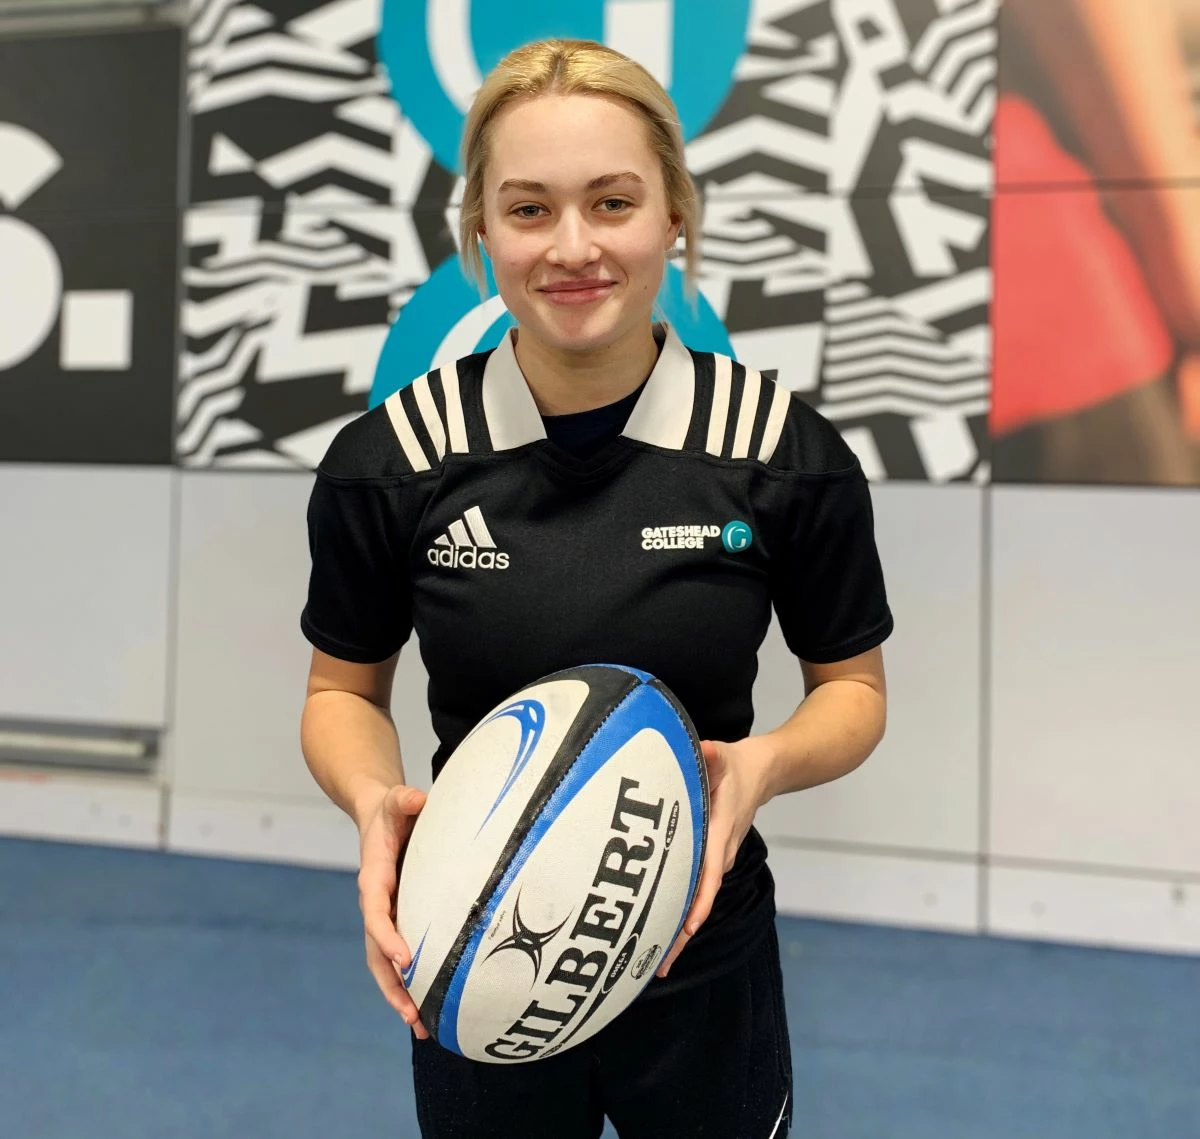 Aspiring young rugby player from South Shields, April Ishida